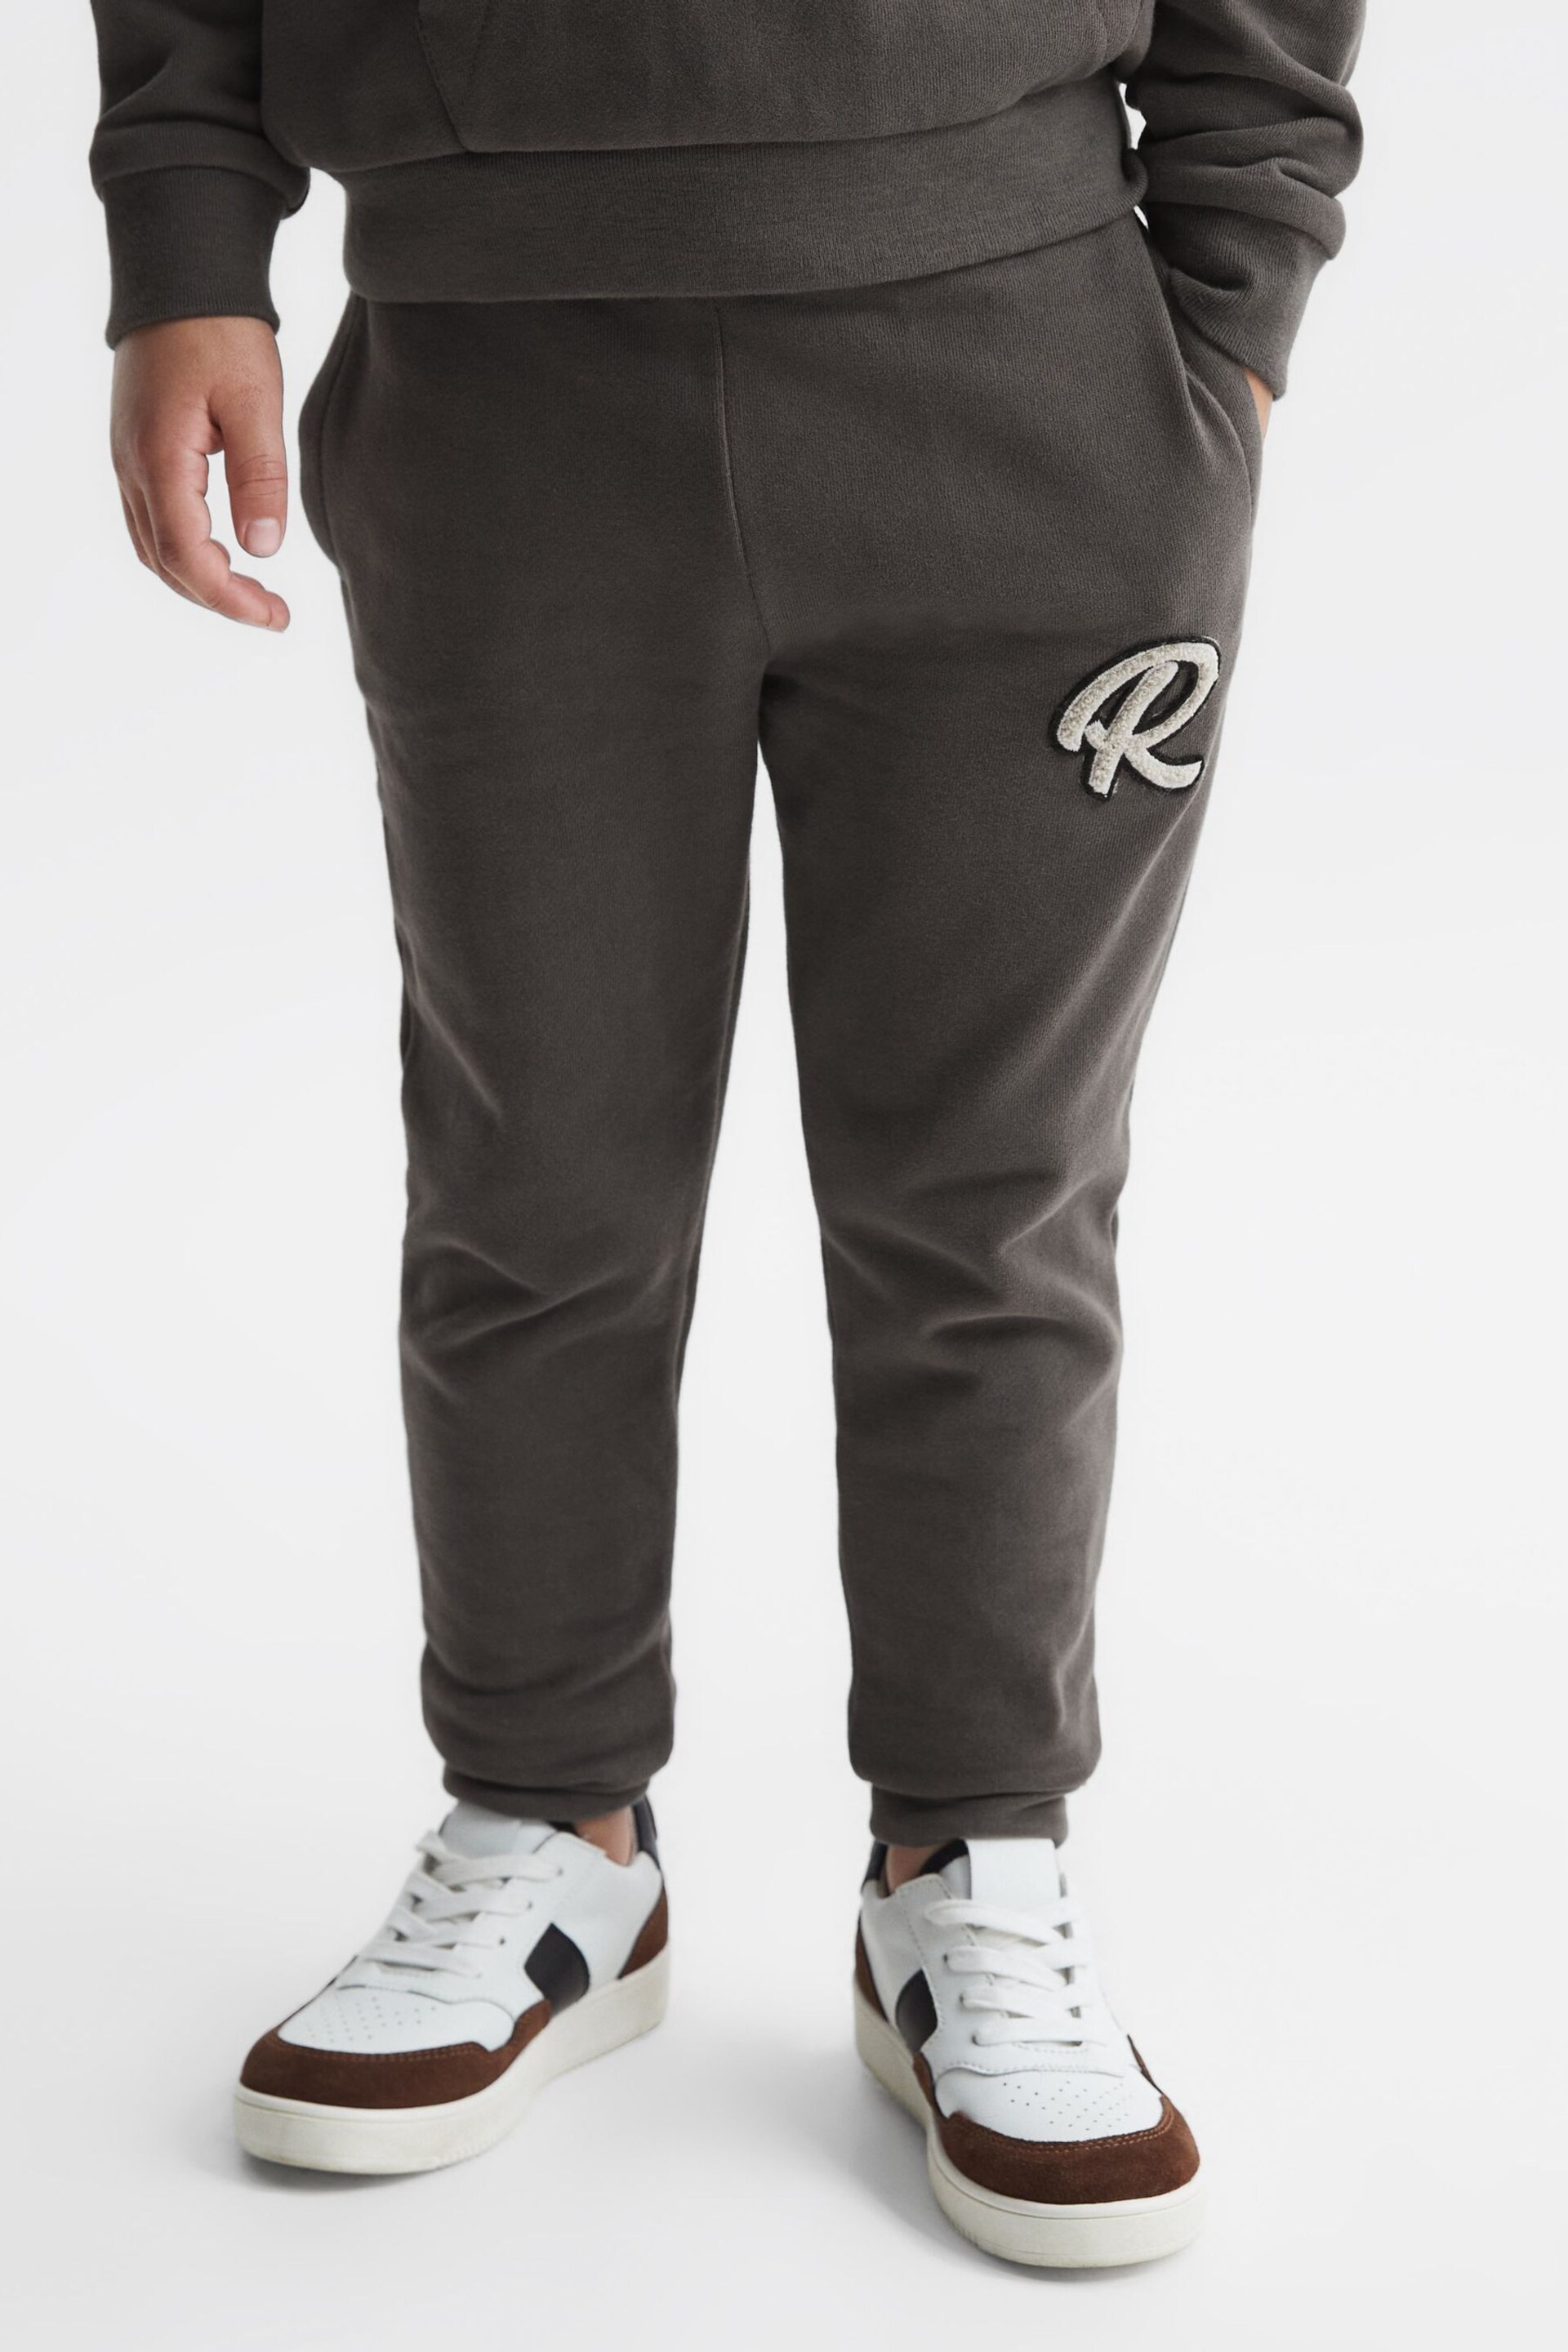 Reiss Olive Toby Garment Dyed Logo Joggers - Image 3 of 6